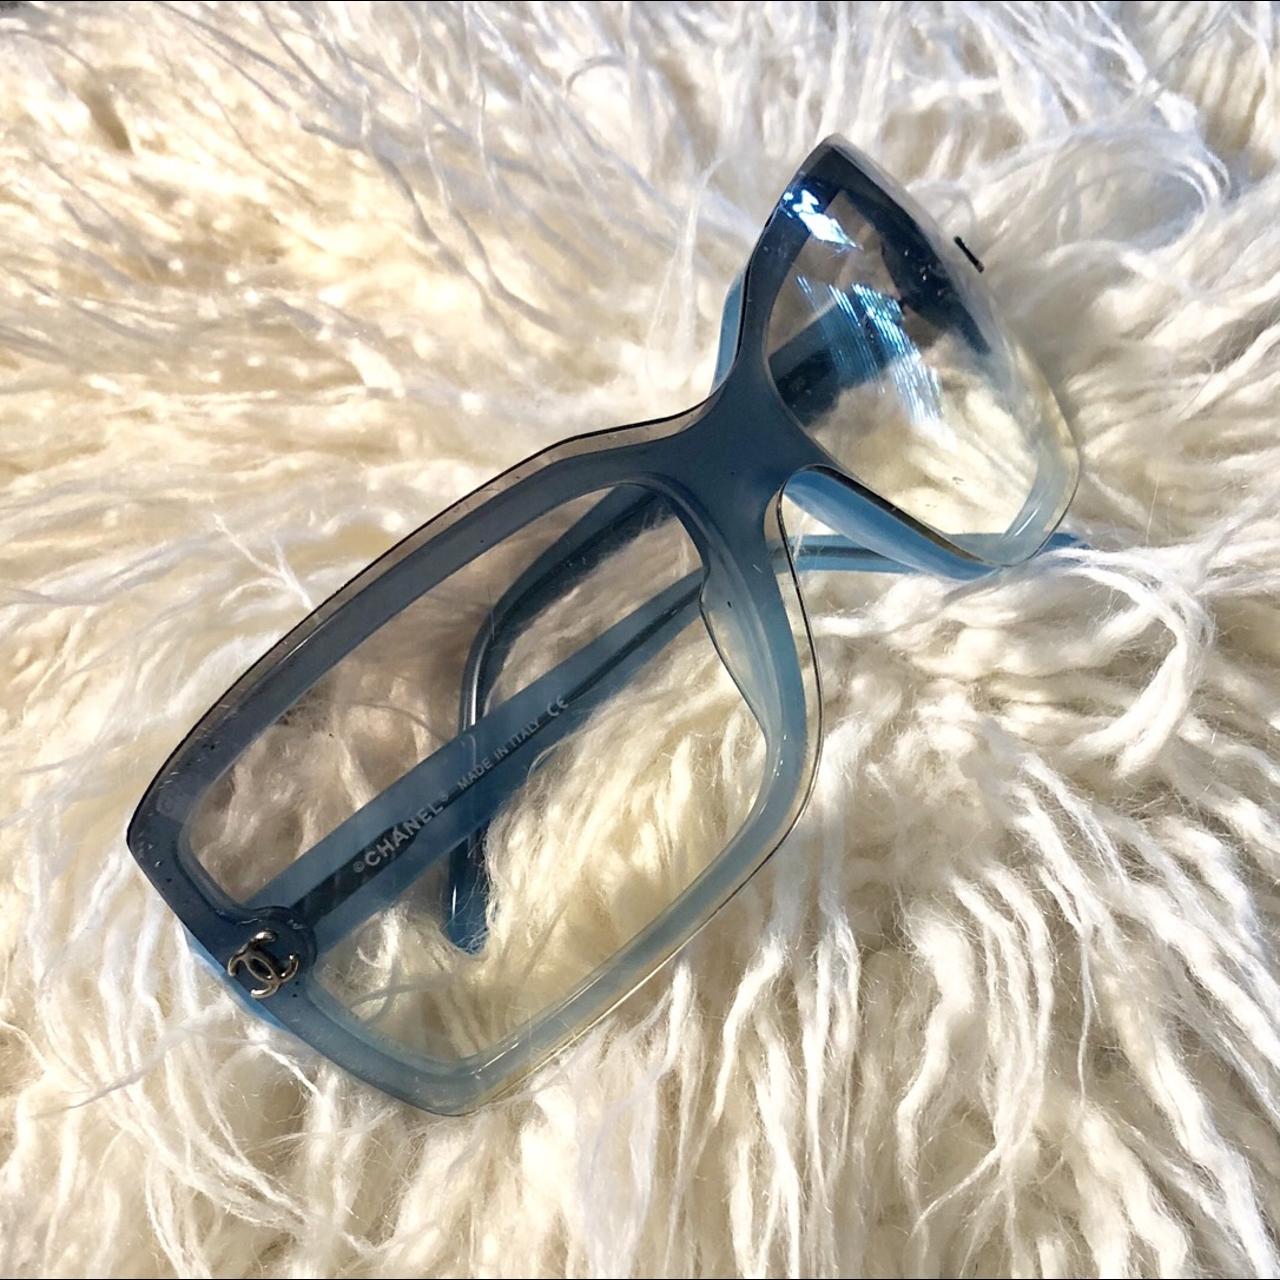 Chanel 2000s Blue Denim Quilted Sunglasses · INTO